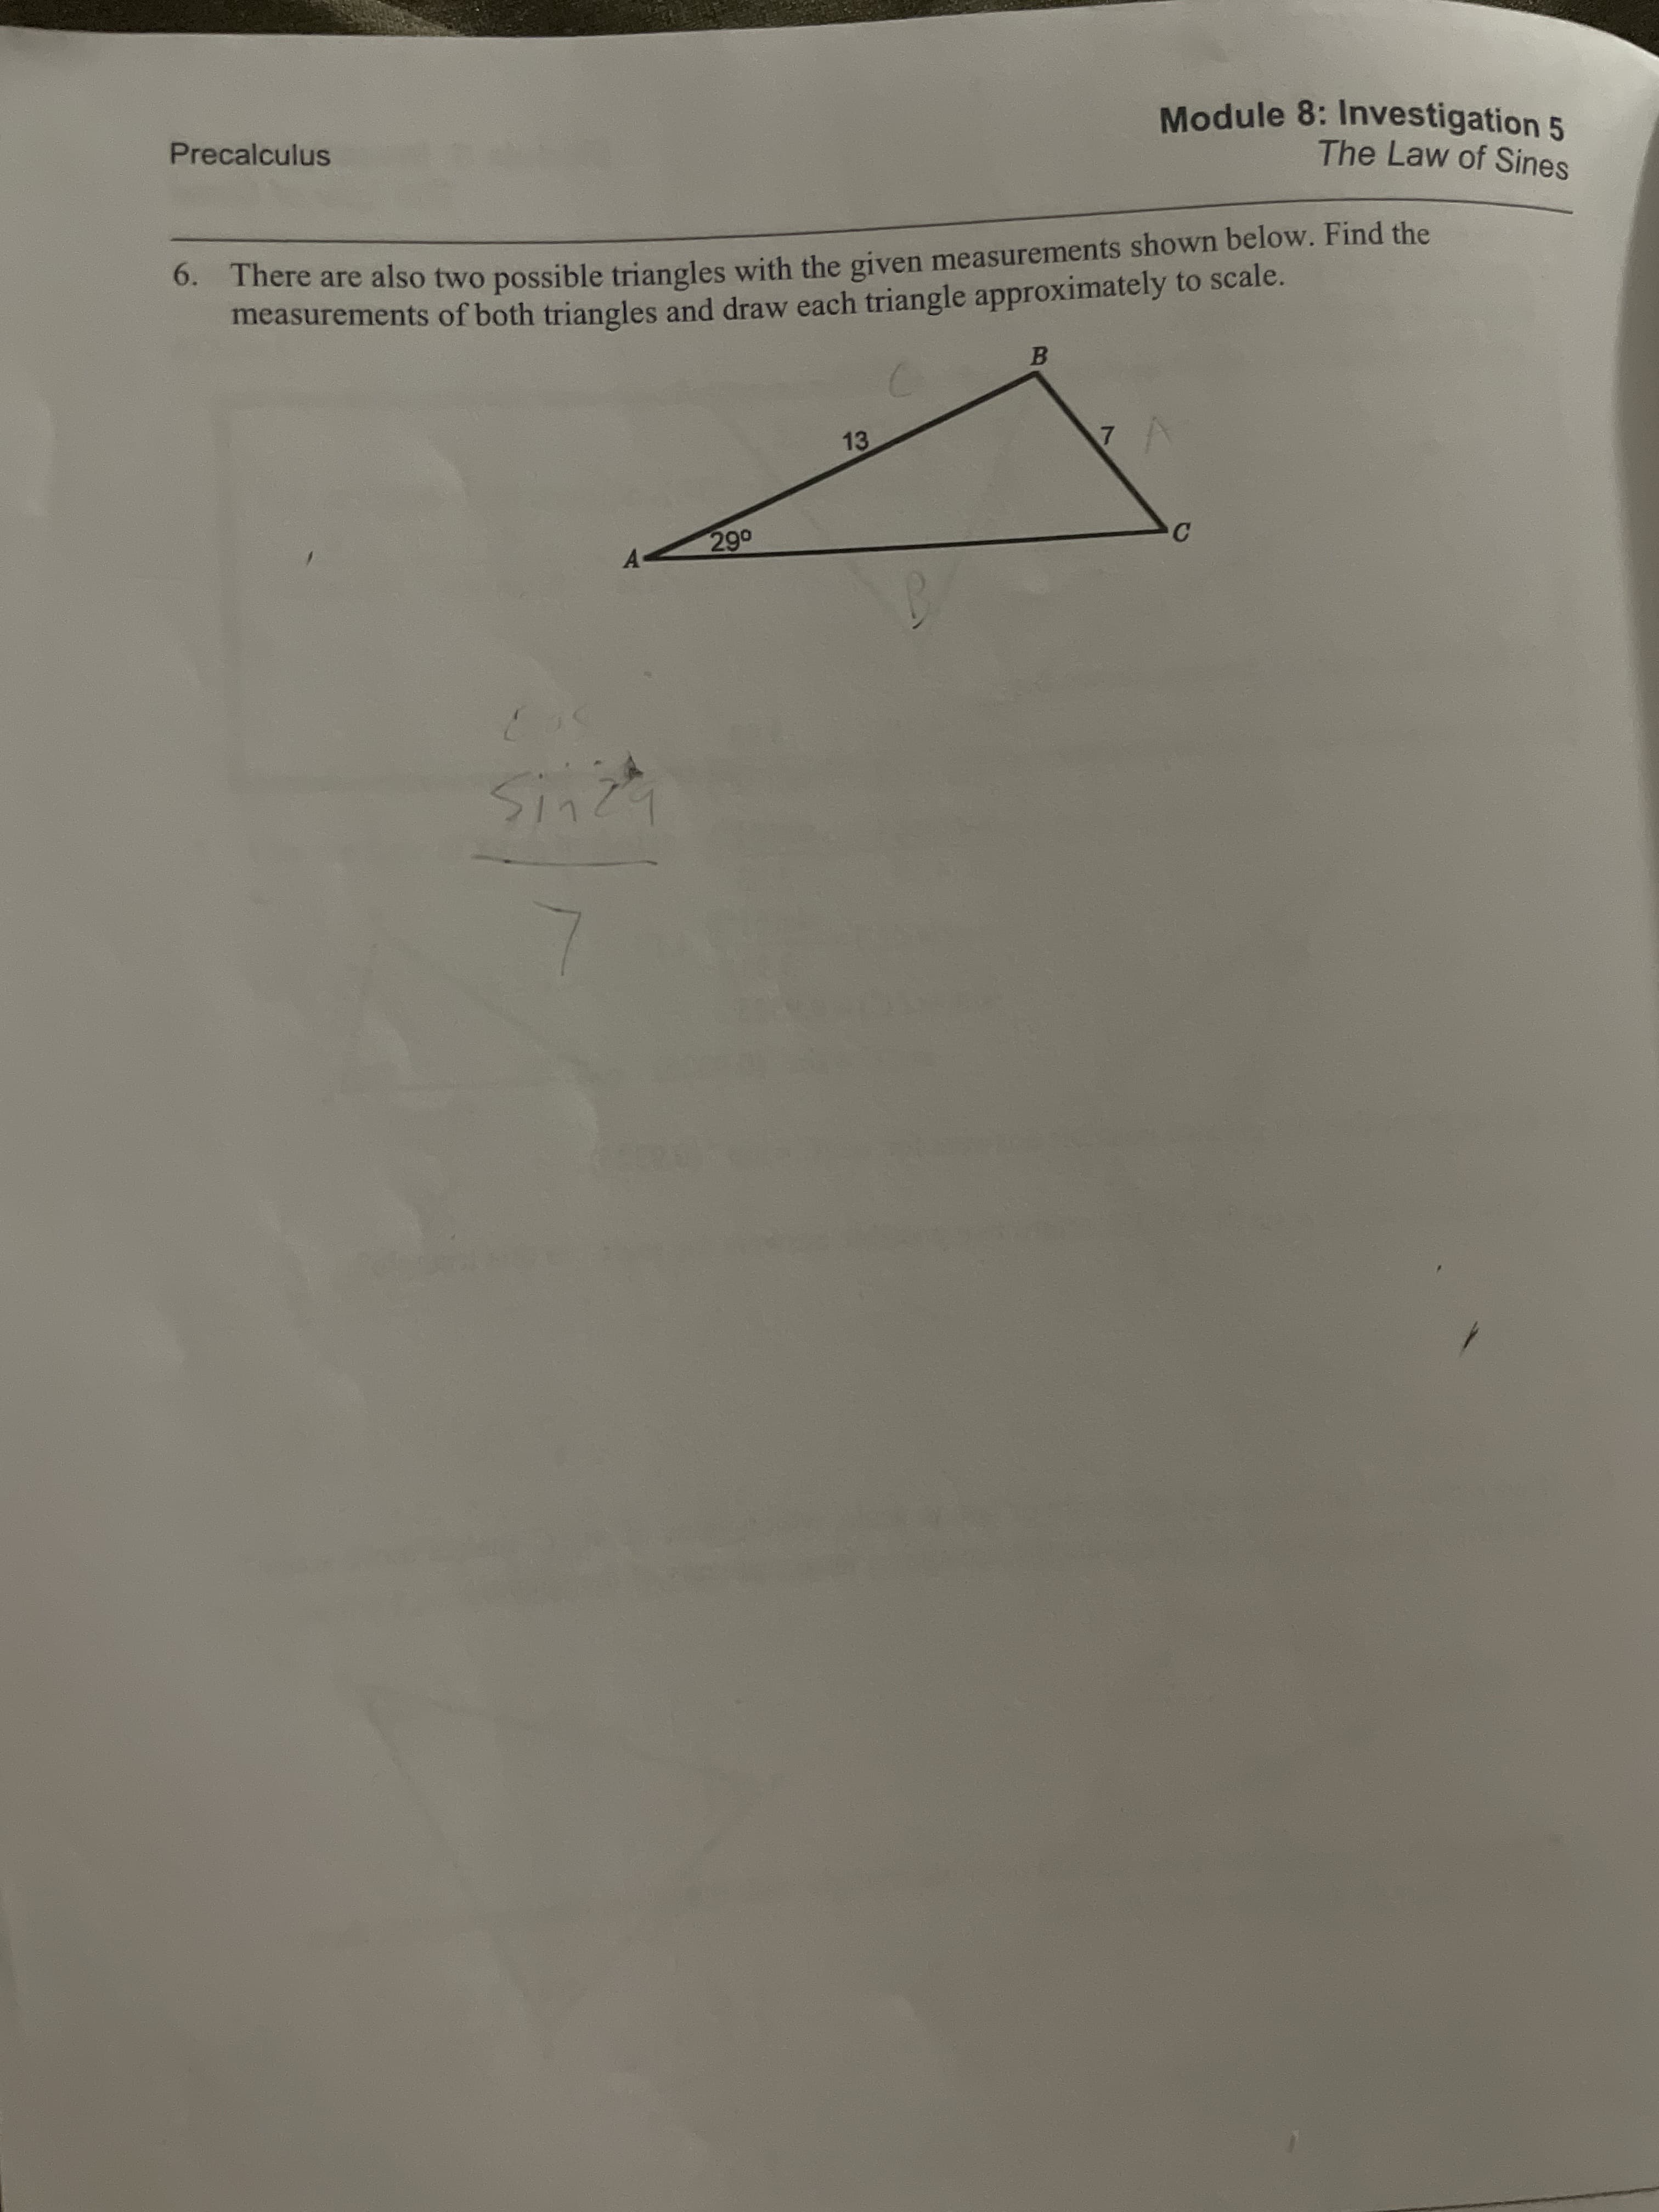 Module 8: Investigation 5
The Law of Sines
Precalculus
There are also two possible triangles with the given measurements shown below. Find the
measurements of both triangles and draw each triangle approximately to scale.
6.
13
7
290
C
A
